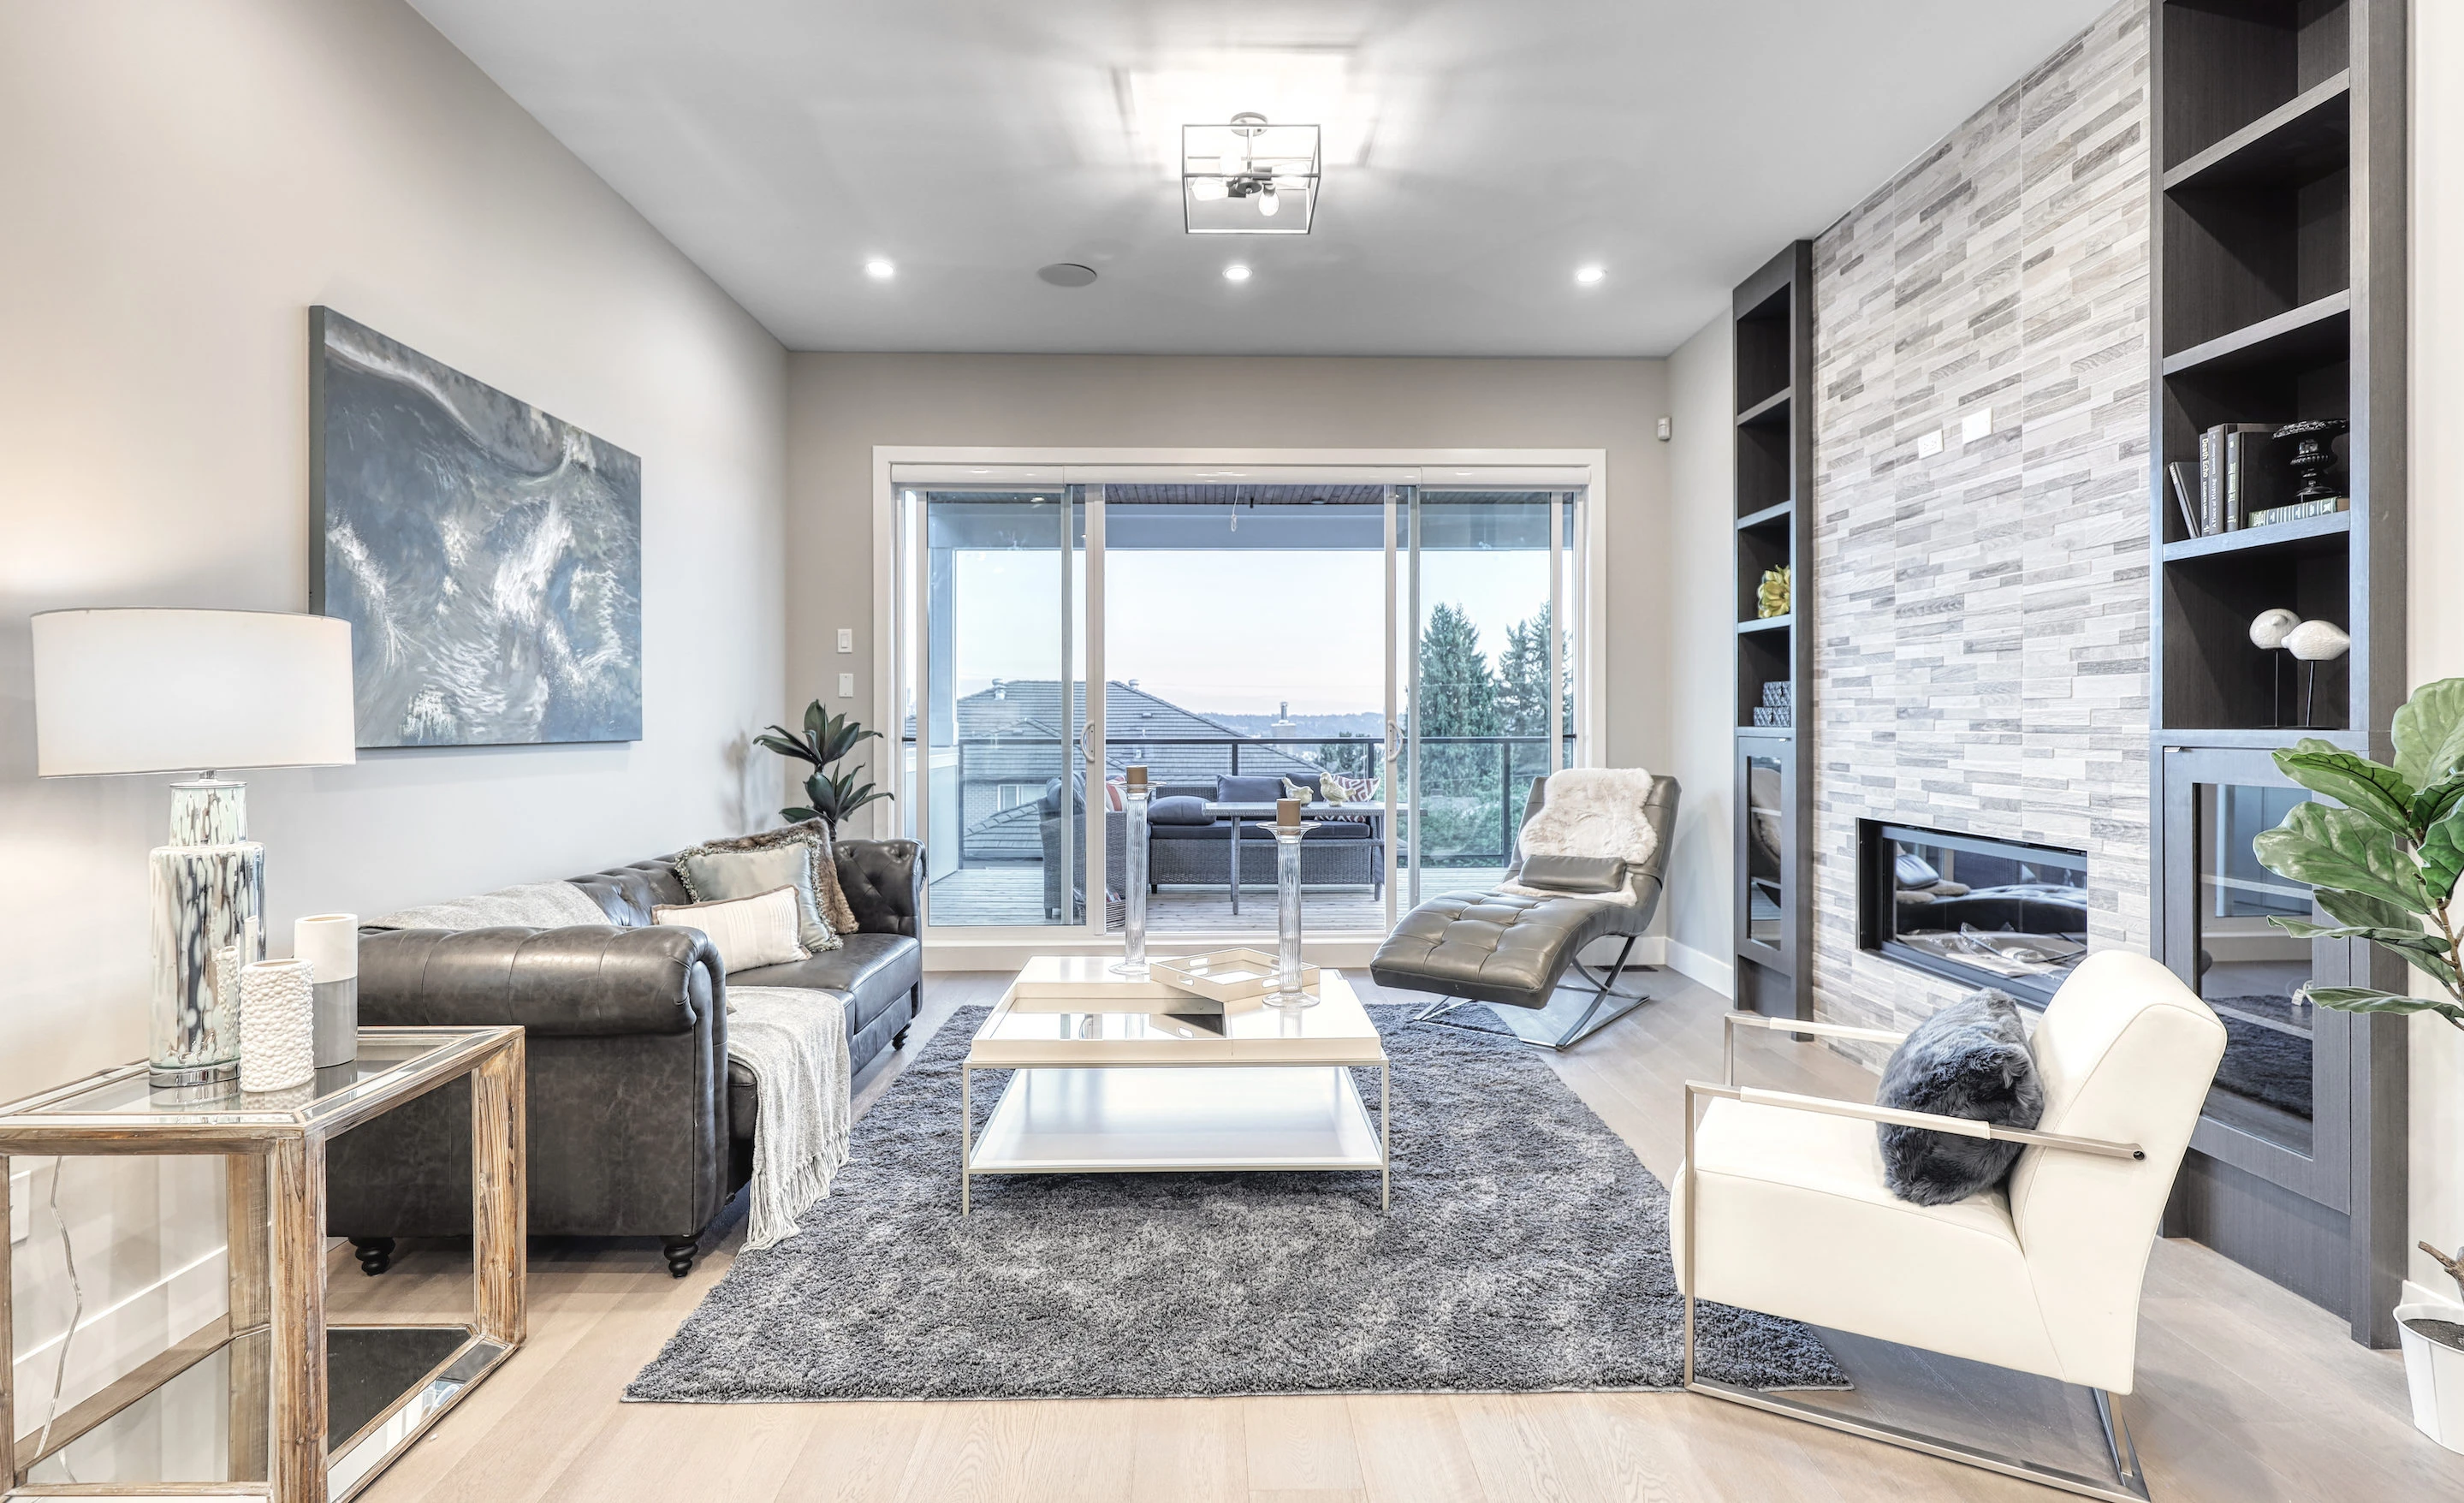 Explore the potential of 1388 Madore Avenue, a customizable haven in the heart of Coquitlam